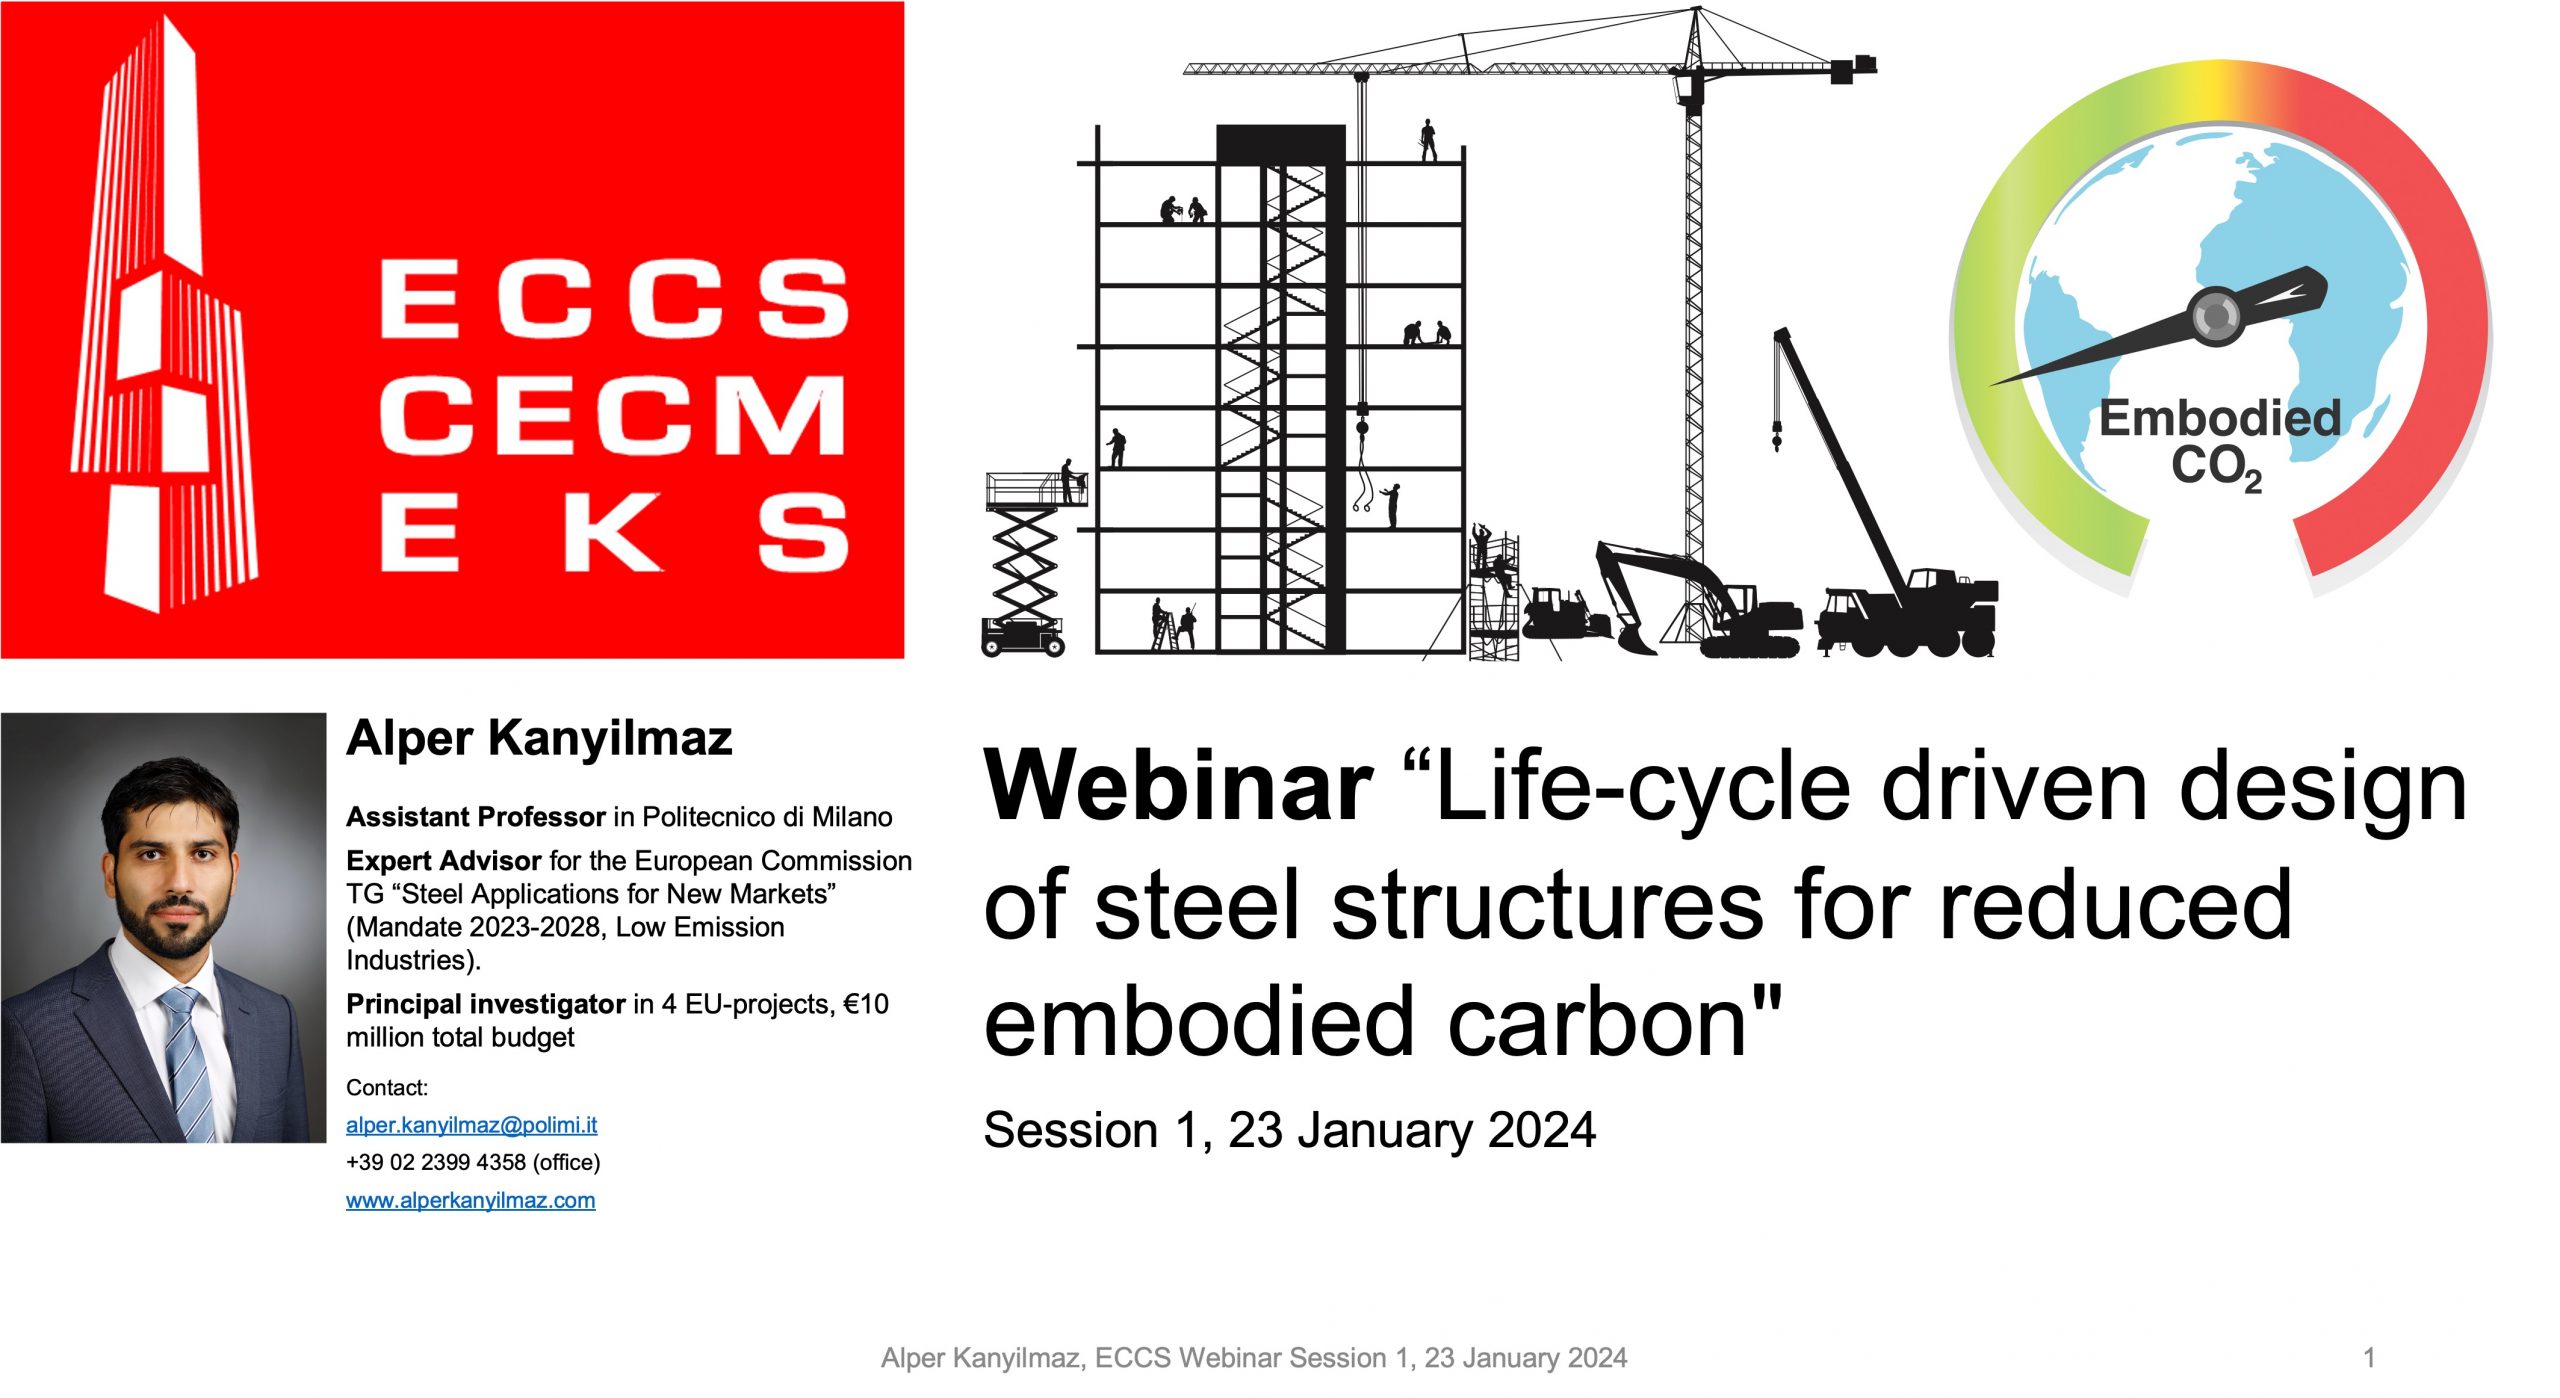 Life-cycle driven design of steel structures